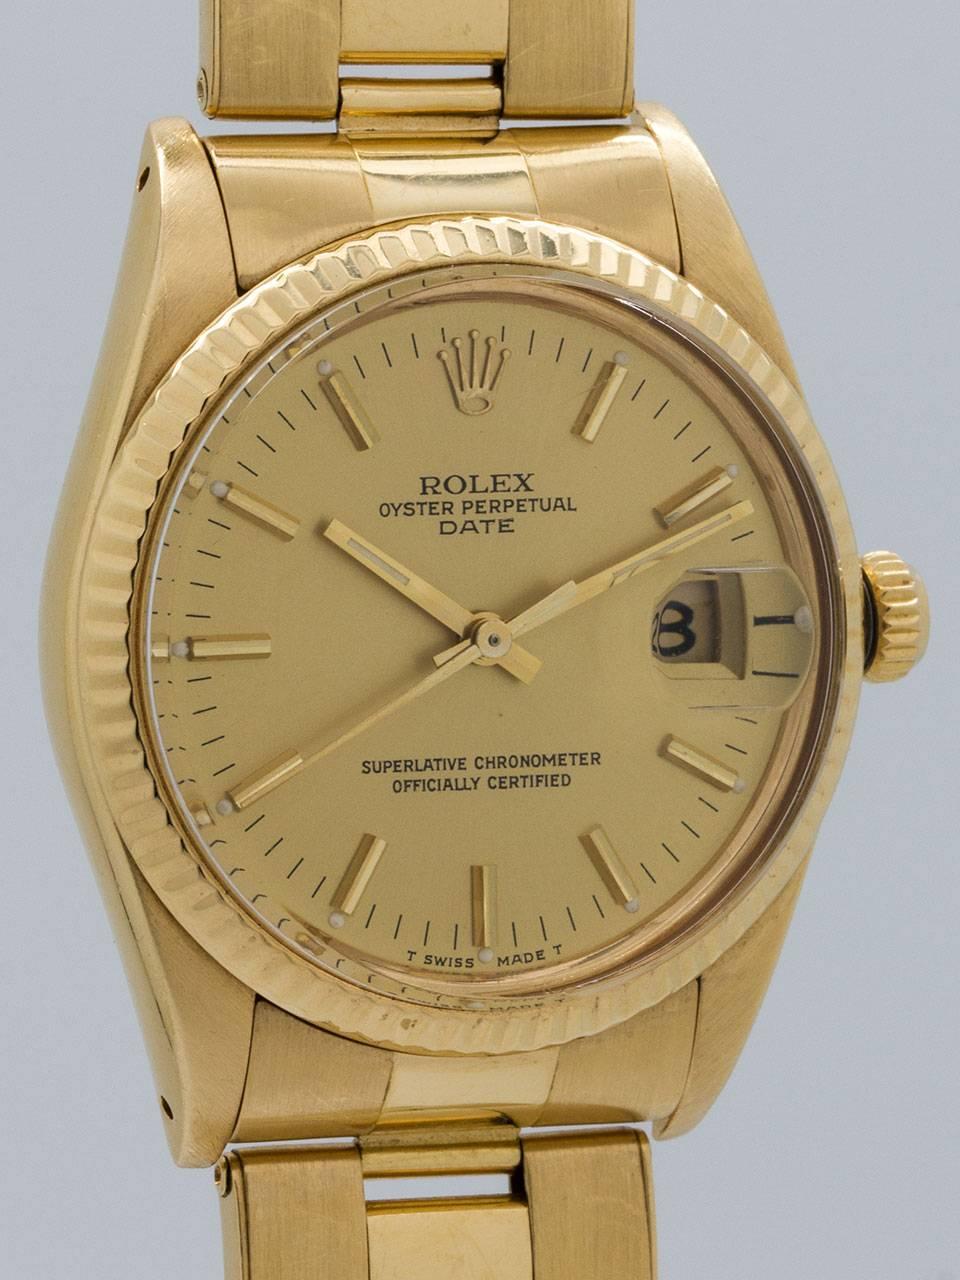 Rolex Oyster Perpetual Date ref 1500 serial number 8.8 million circa 1985. Featuring 34mm diameter 18K yellow gold case with smooth bezel and acrylic crystal. Original champagne dial with applied gold indexes and gilt baton hands. Powered by self